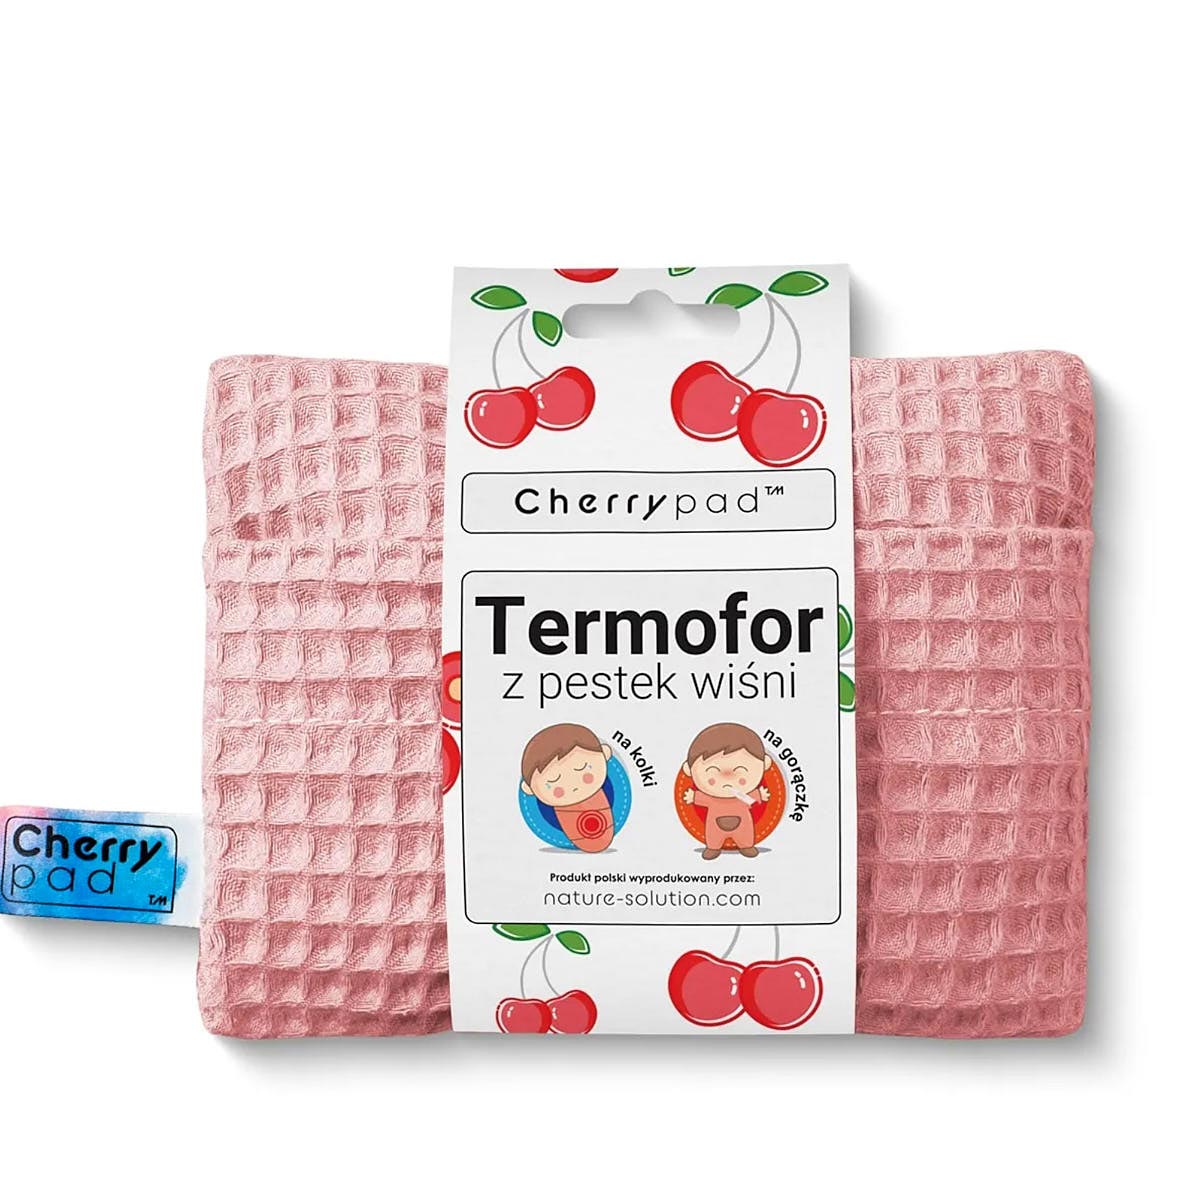 Termofor Cherrypad – Wafel - Nature-solution pudrowy róż